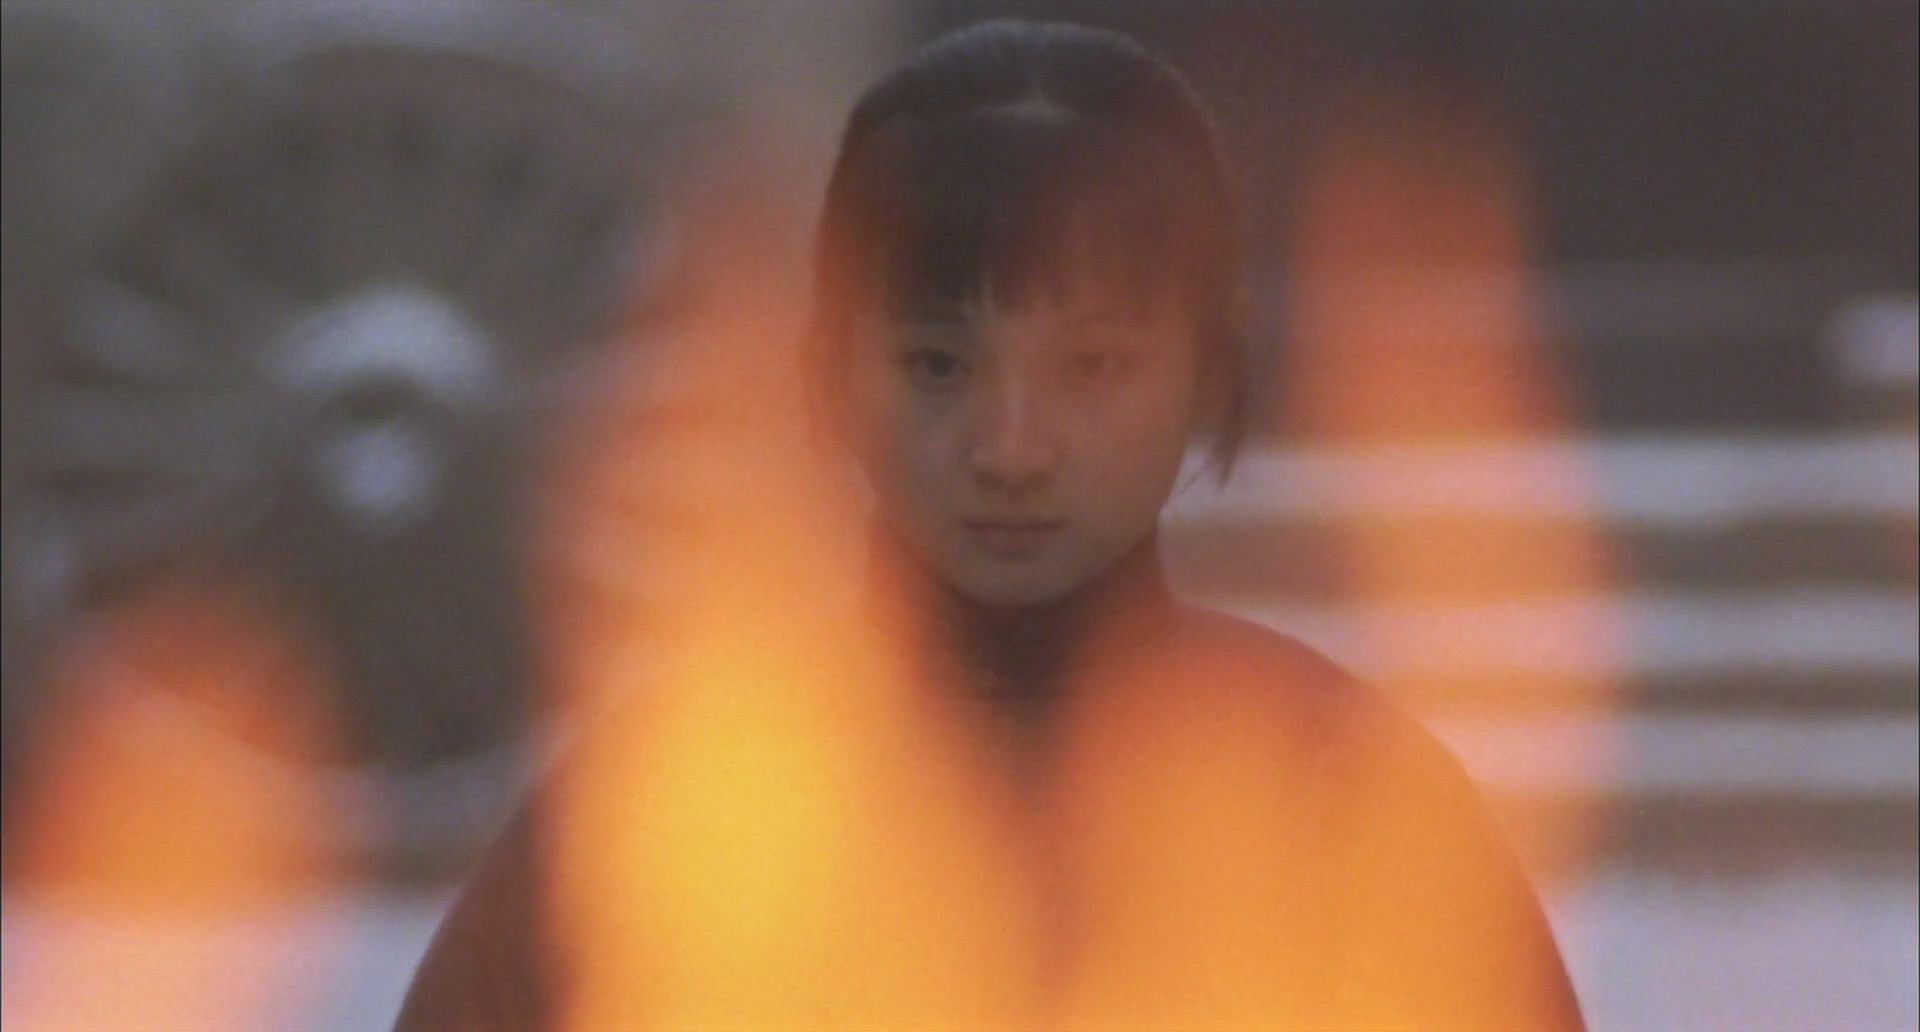 Lin Kong in Raise the Red Lantern